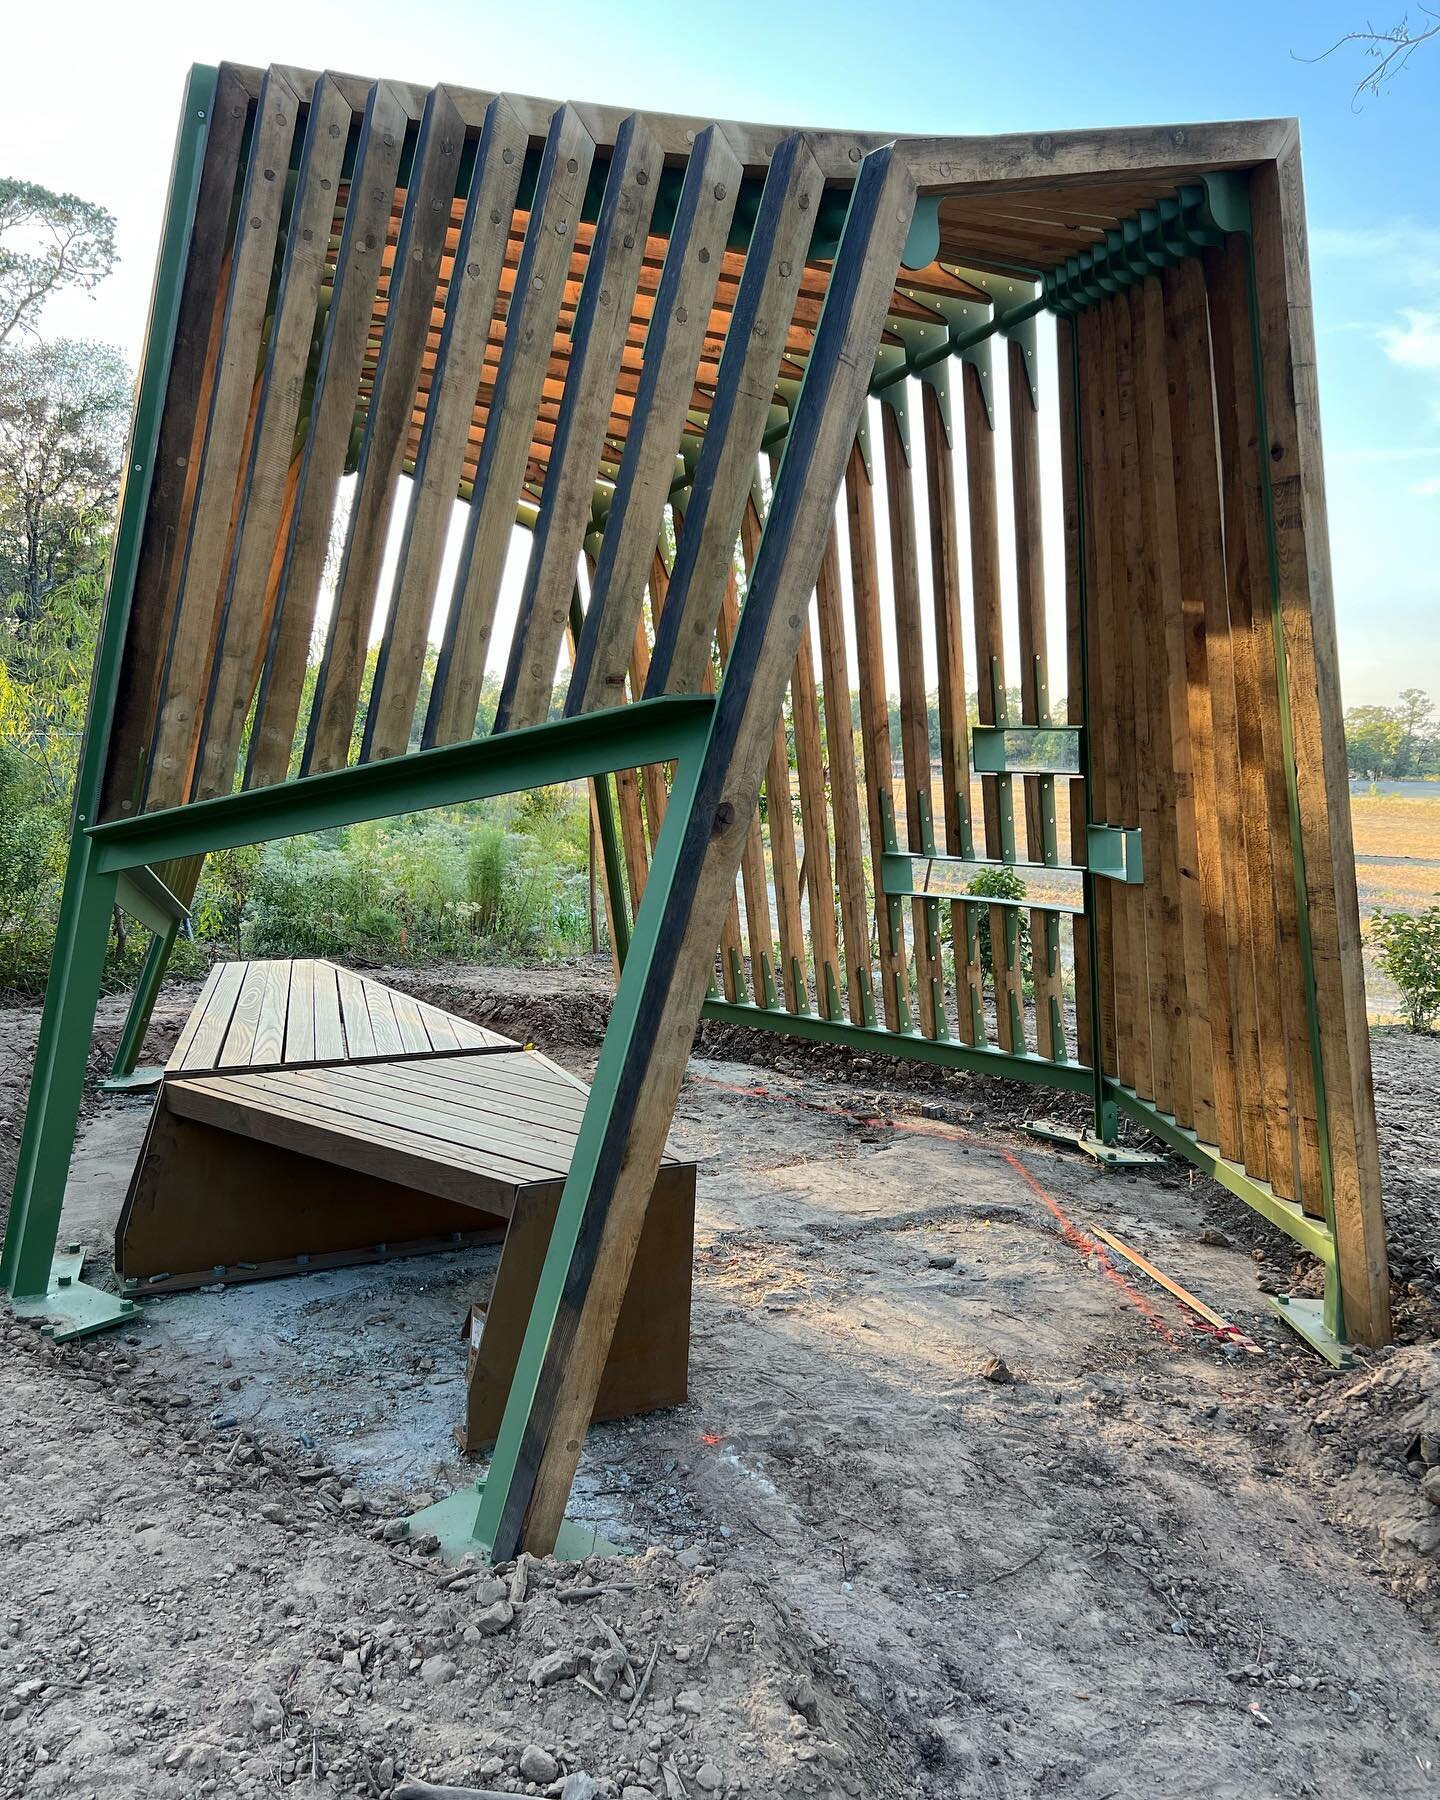 This beautifully formed birding shelter is ideally suited to its placement above the vast newly-grown meadow south of the new Land Bridge. Occupants are able to view into the meadow while camouflaged from the wildlife. It seems like the merest amount